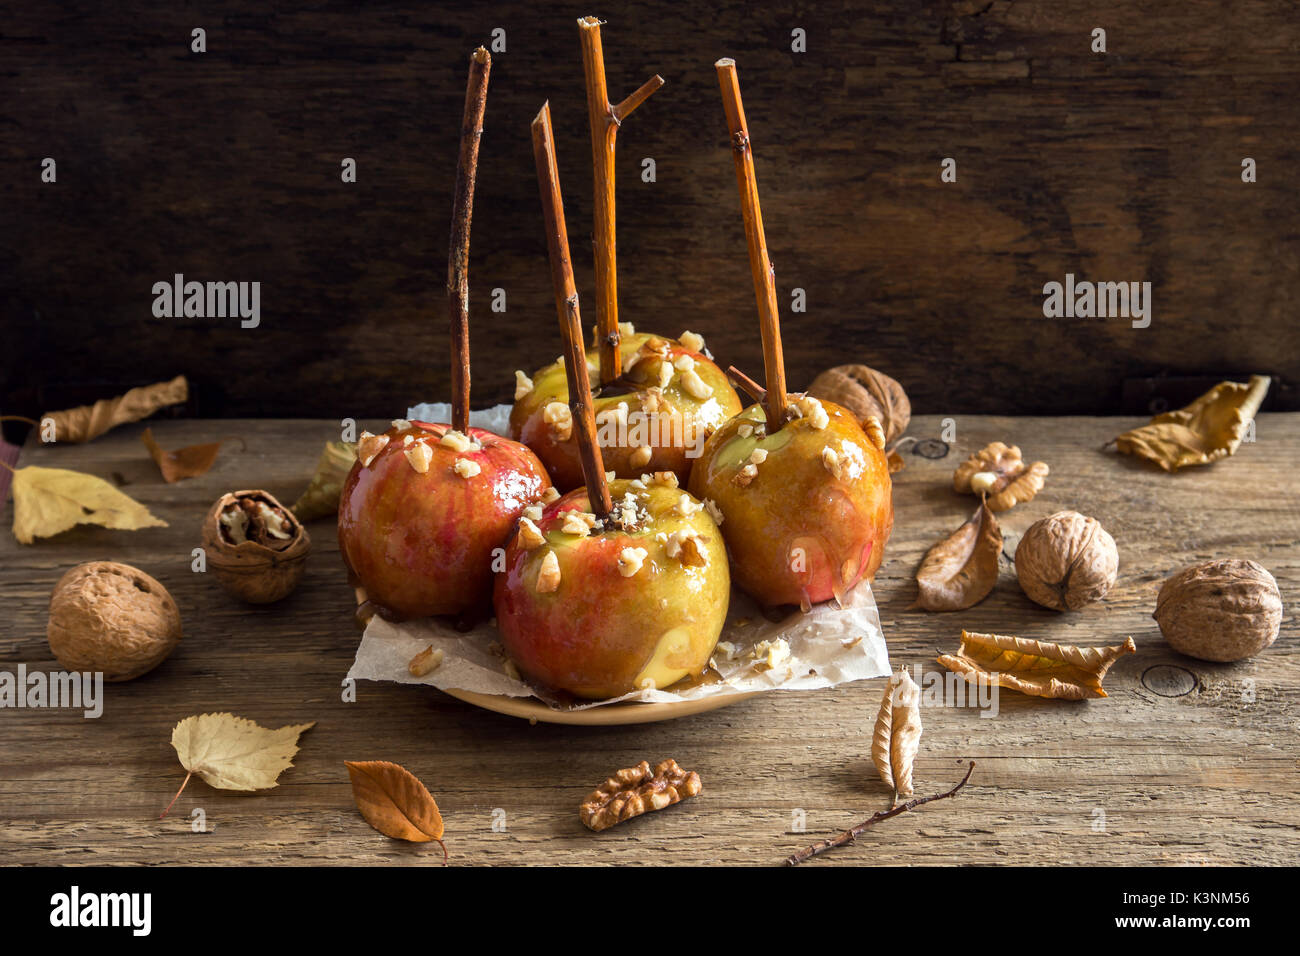 Homemade Caramel Apples on a Stick for Halloween. Organic Snack - Caramel Apples with Walnuts. Stock Photo